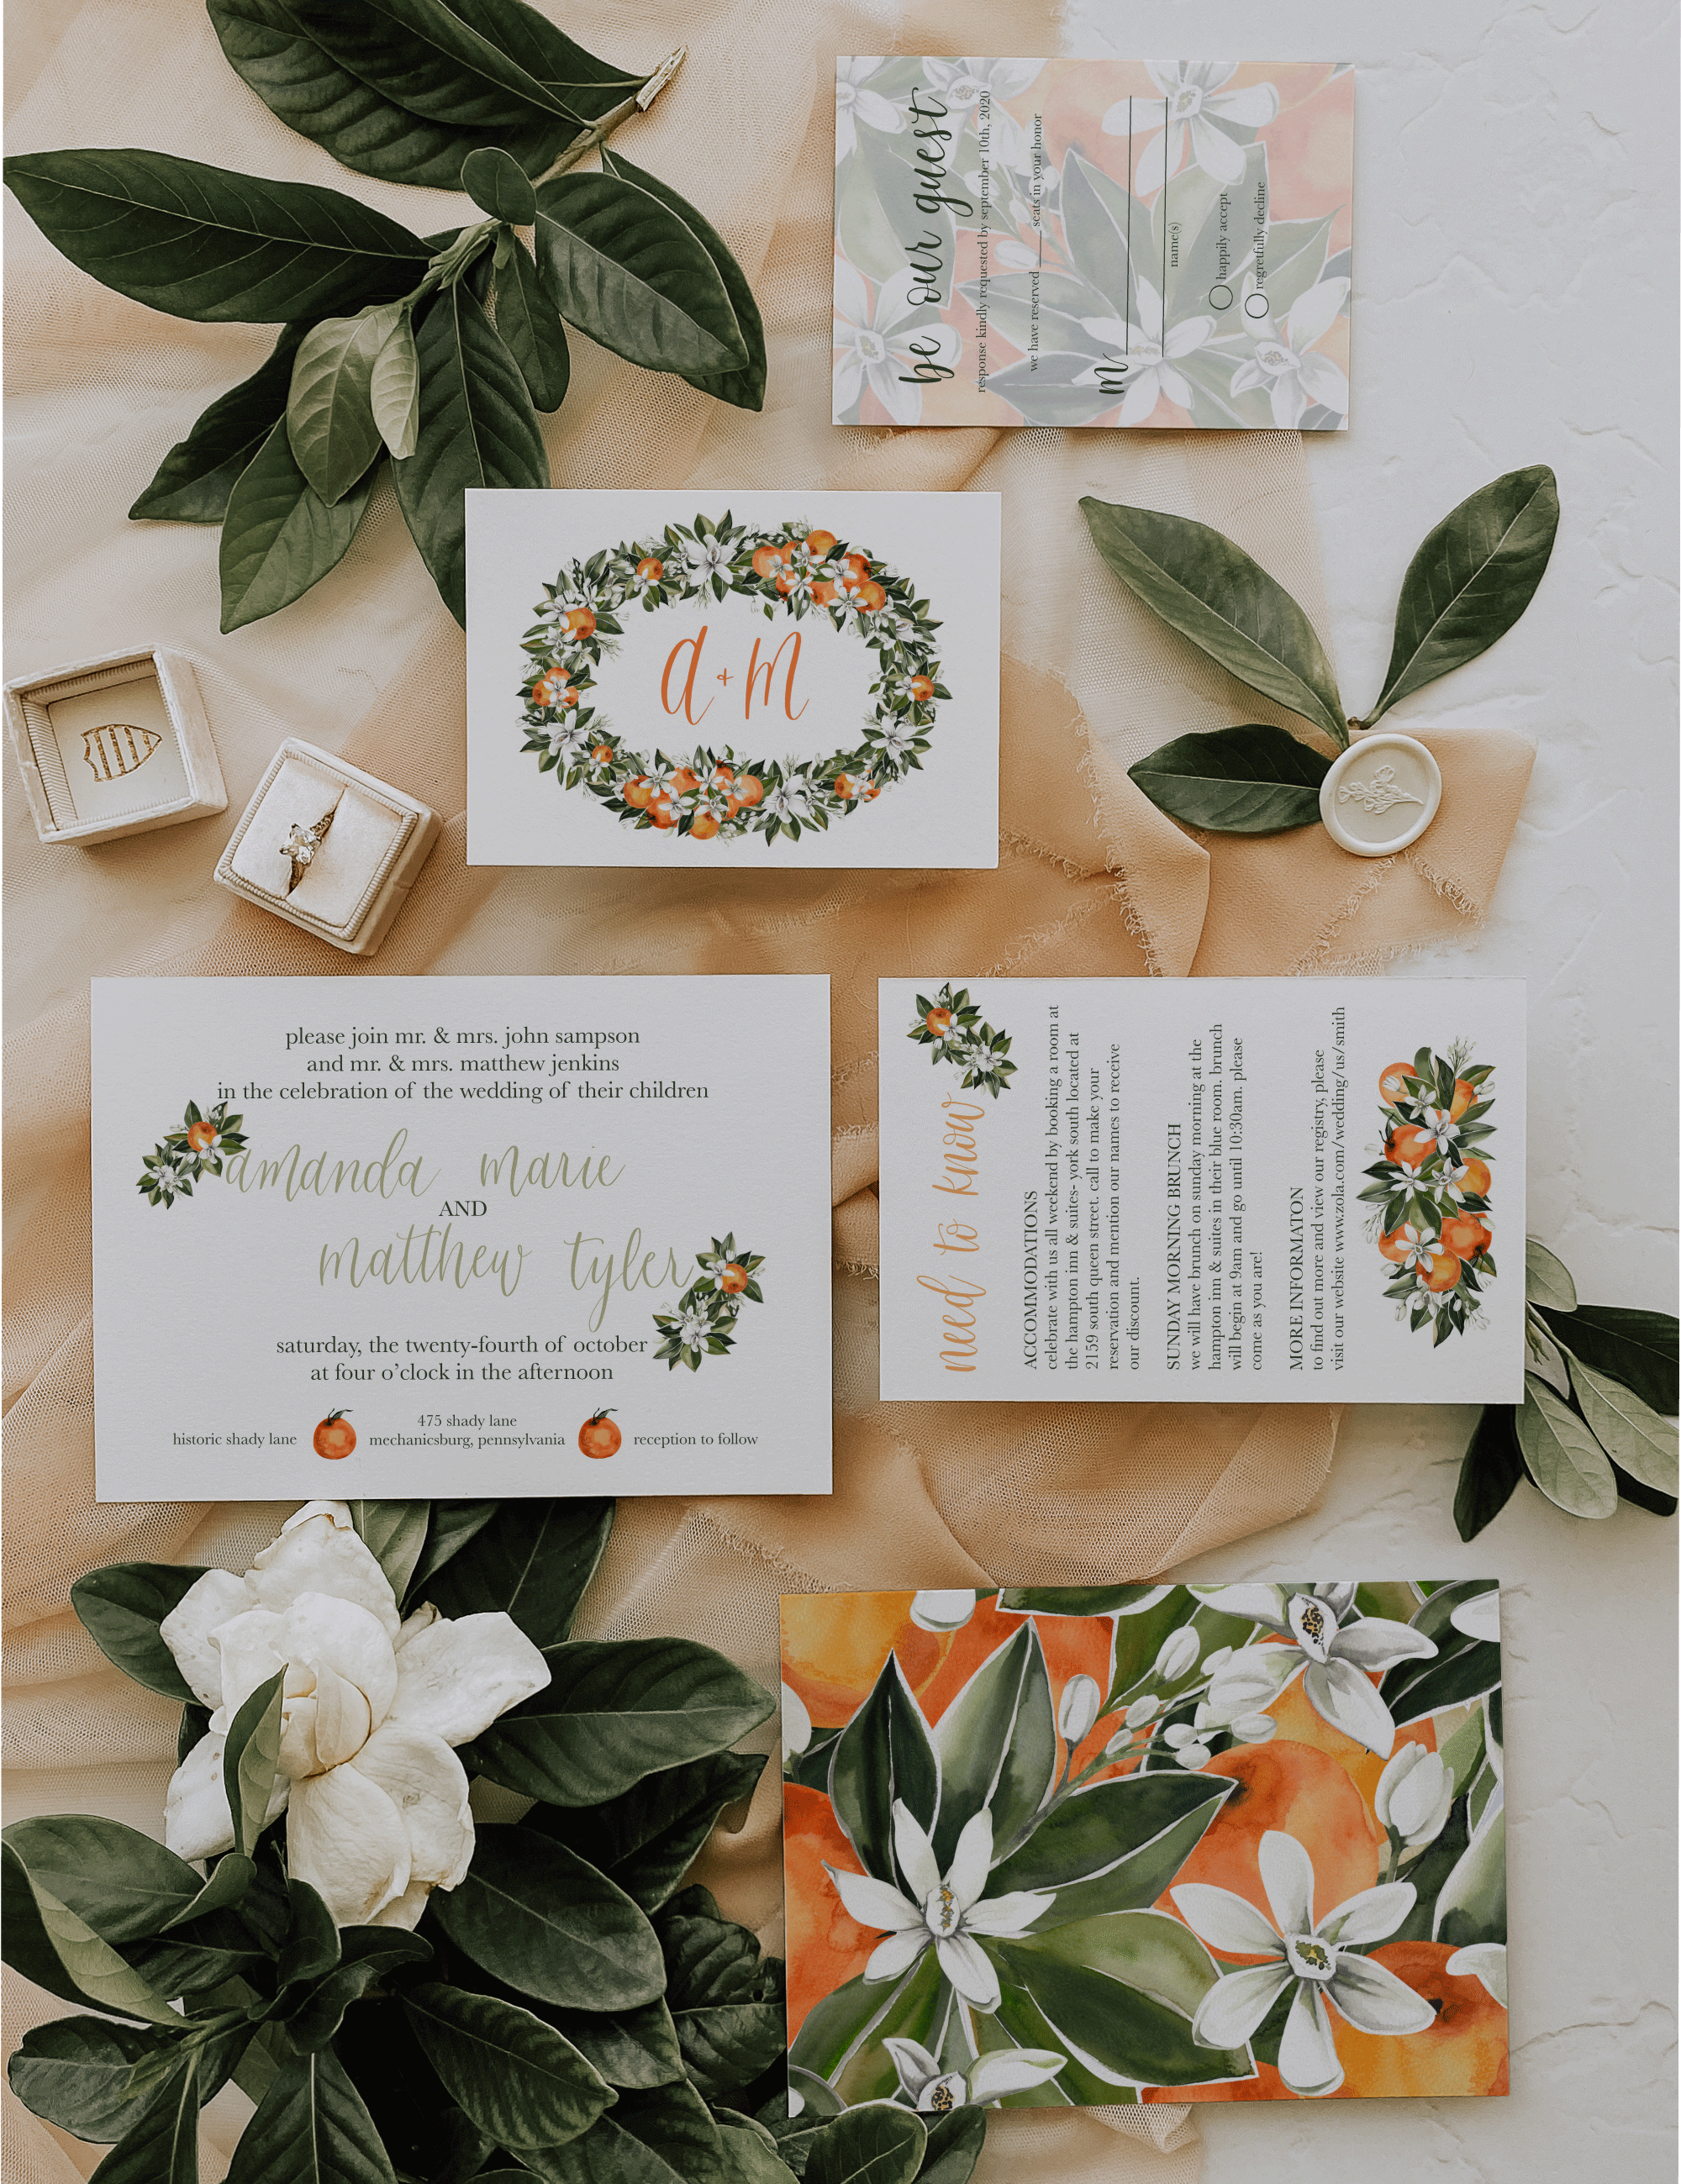 HOW TO HAVE ECO-FRIENDLY WEDDING INVITATIONS IN 2021